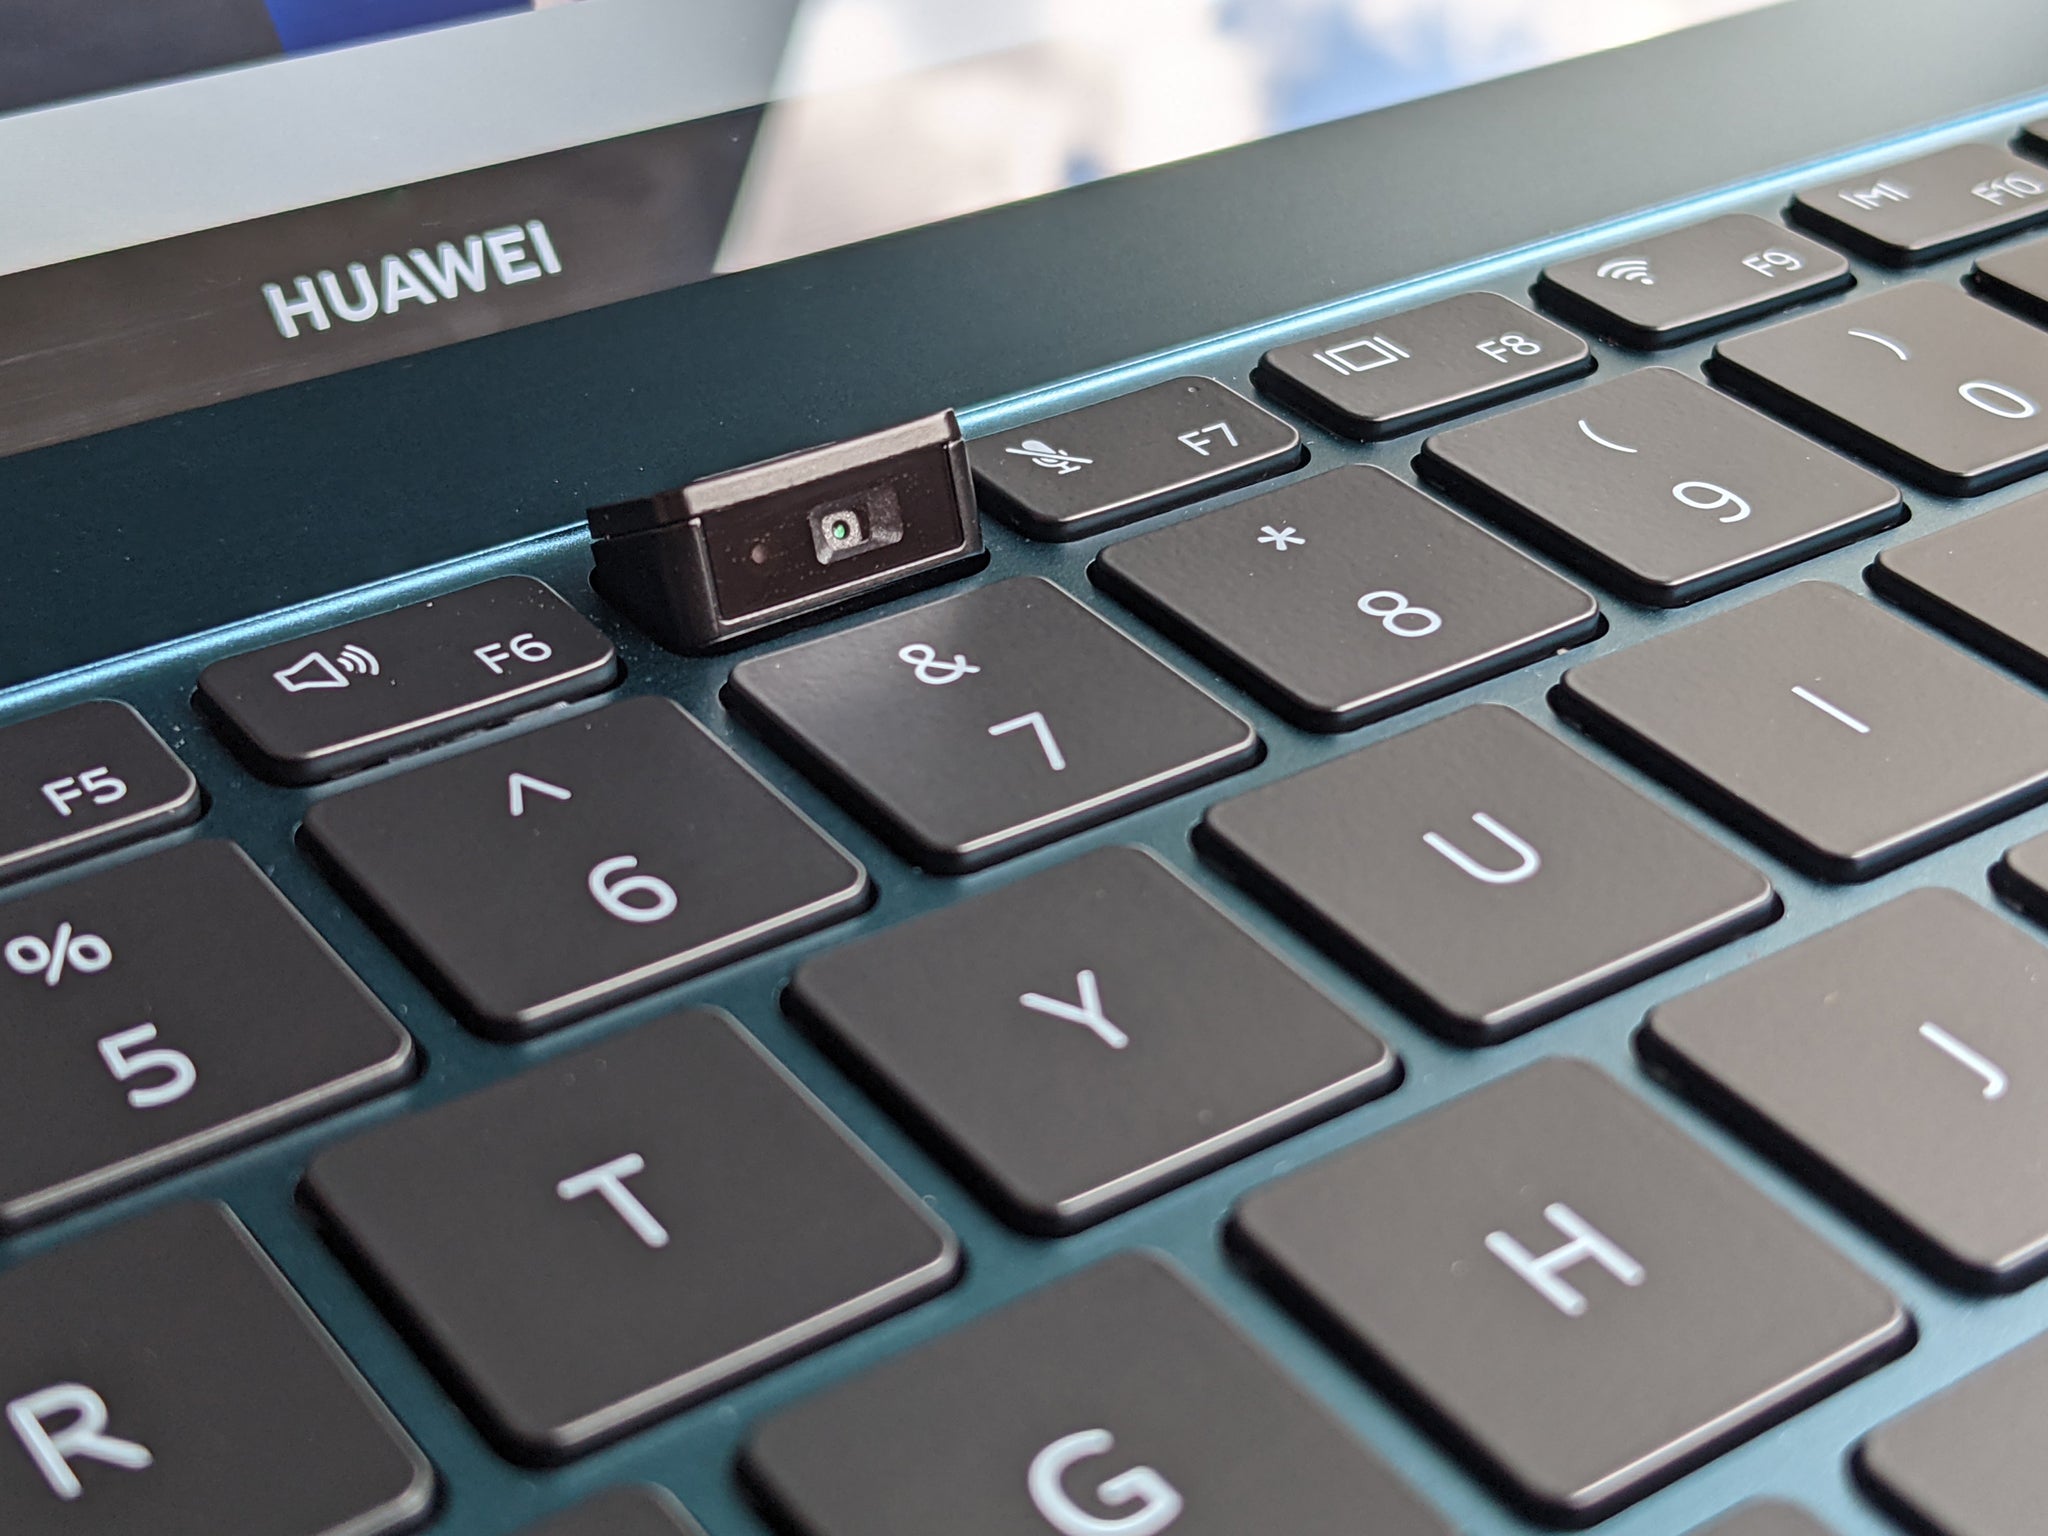 Huawei’s unfortunately positioned pop-up webcam hides beneath a fake key